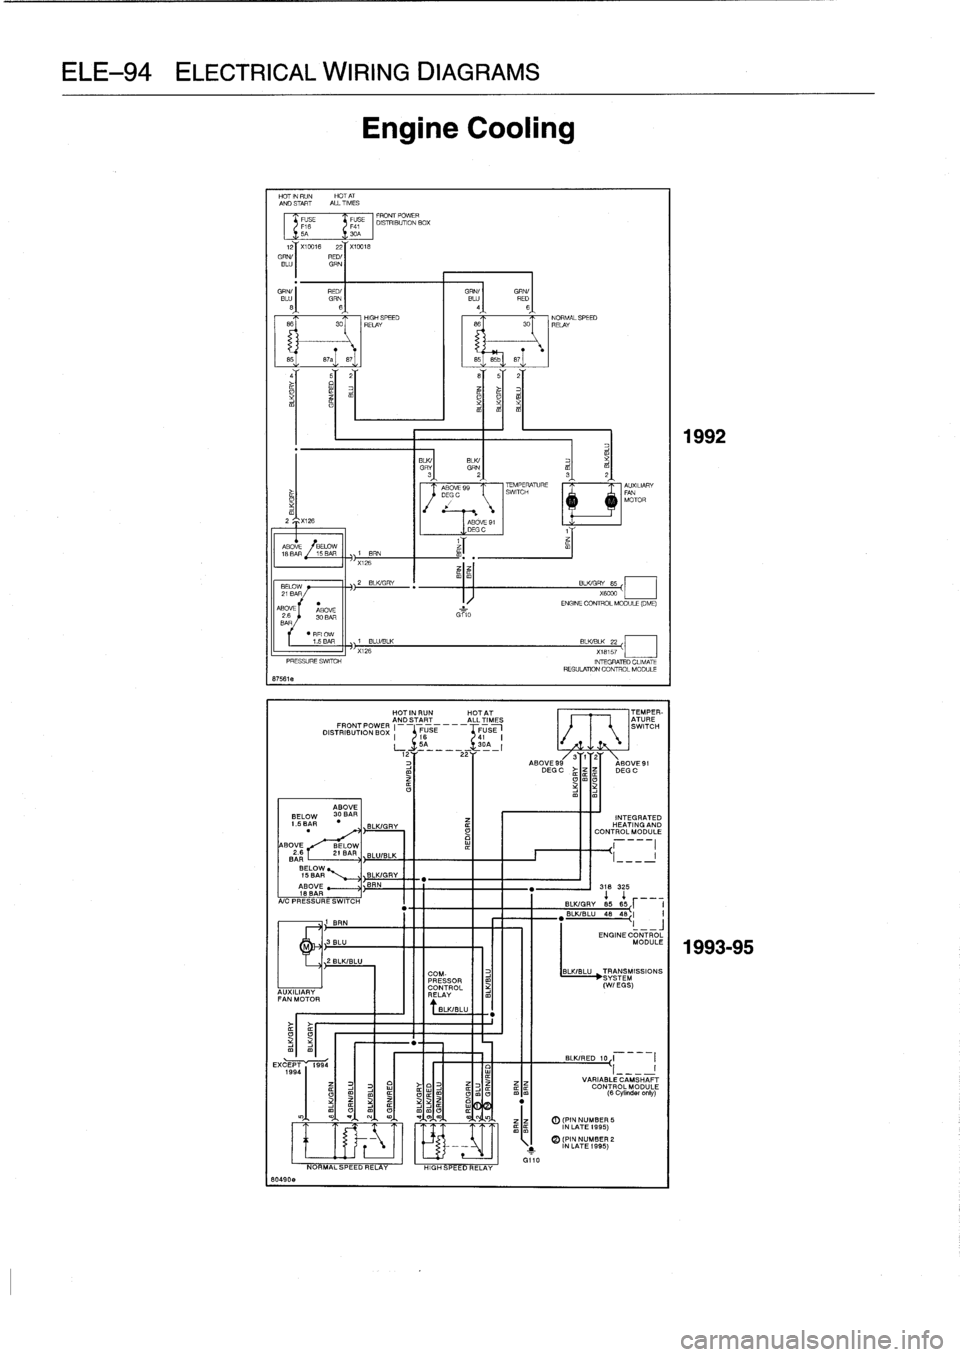 BMW 325i 1998 E36 Service Manual 
ELE-94
ELECTRICAL
WIRING
DIAGRAMS

HOT
IN
RUN

	

HOT
AT
AND
START

	

ALLTIMES
FUSE

	

FUSE

	

FRONT
POWER
F16

	

pq1

	

DISTRIBUTION
BOX

j

5A

	

30A
X
W16

	

22

	

X10018
OR
RED/~
B
GRN
I